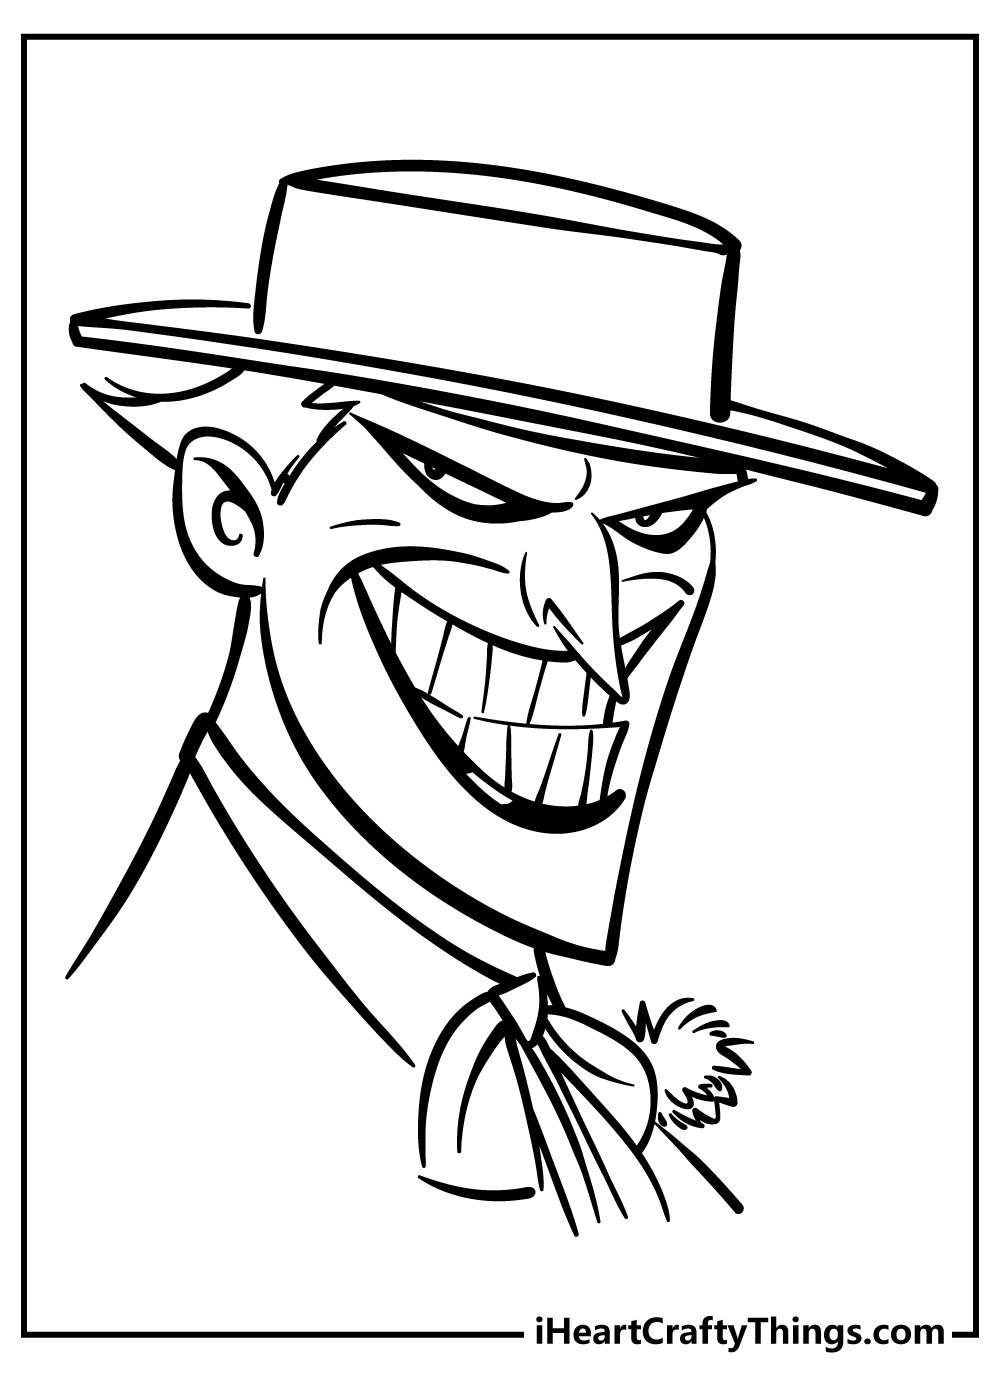 Joker Coloring Pages for adults free printable